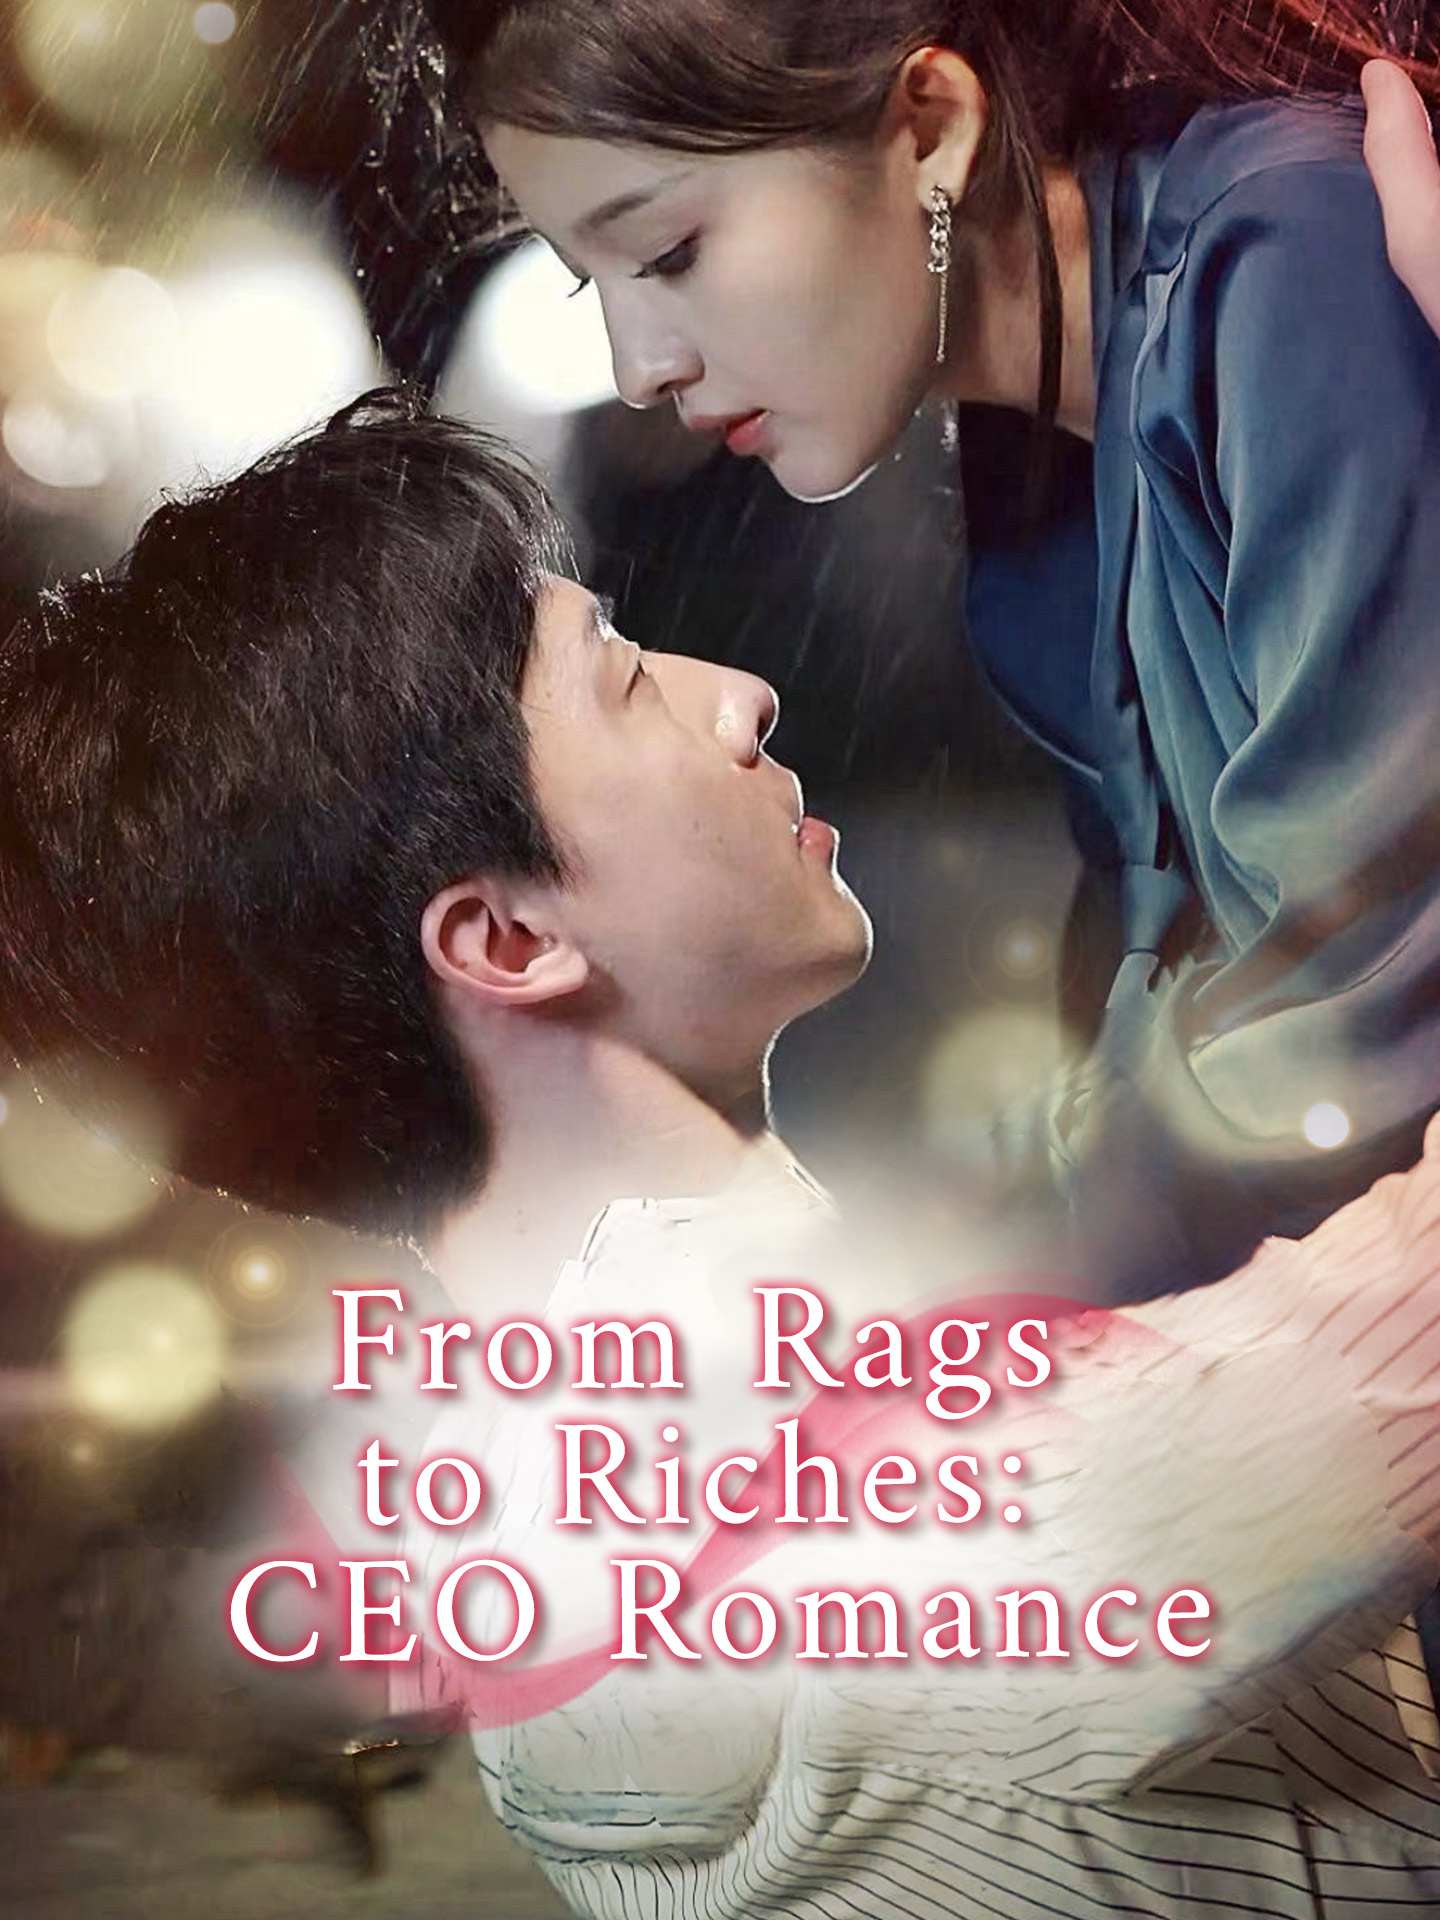 From Rags to Riches: CEO Romance